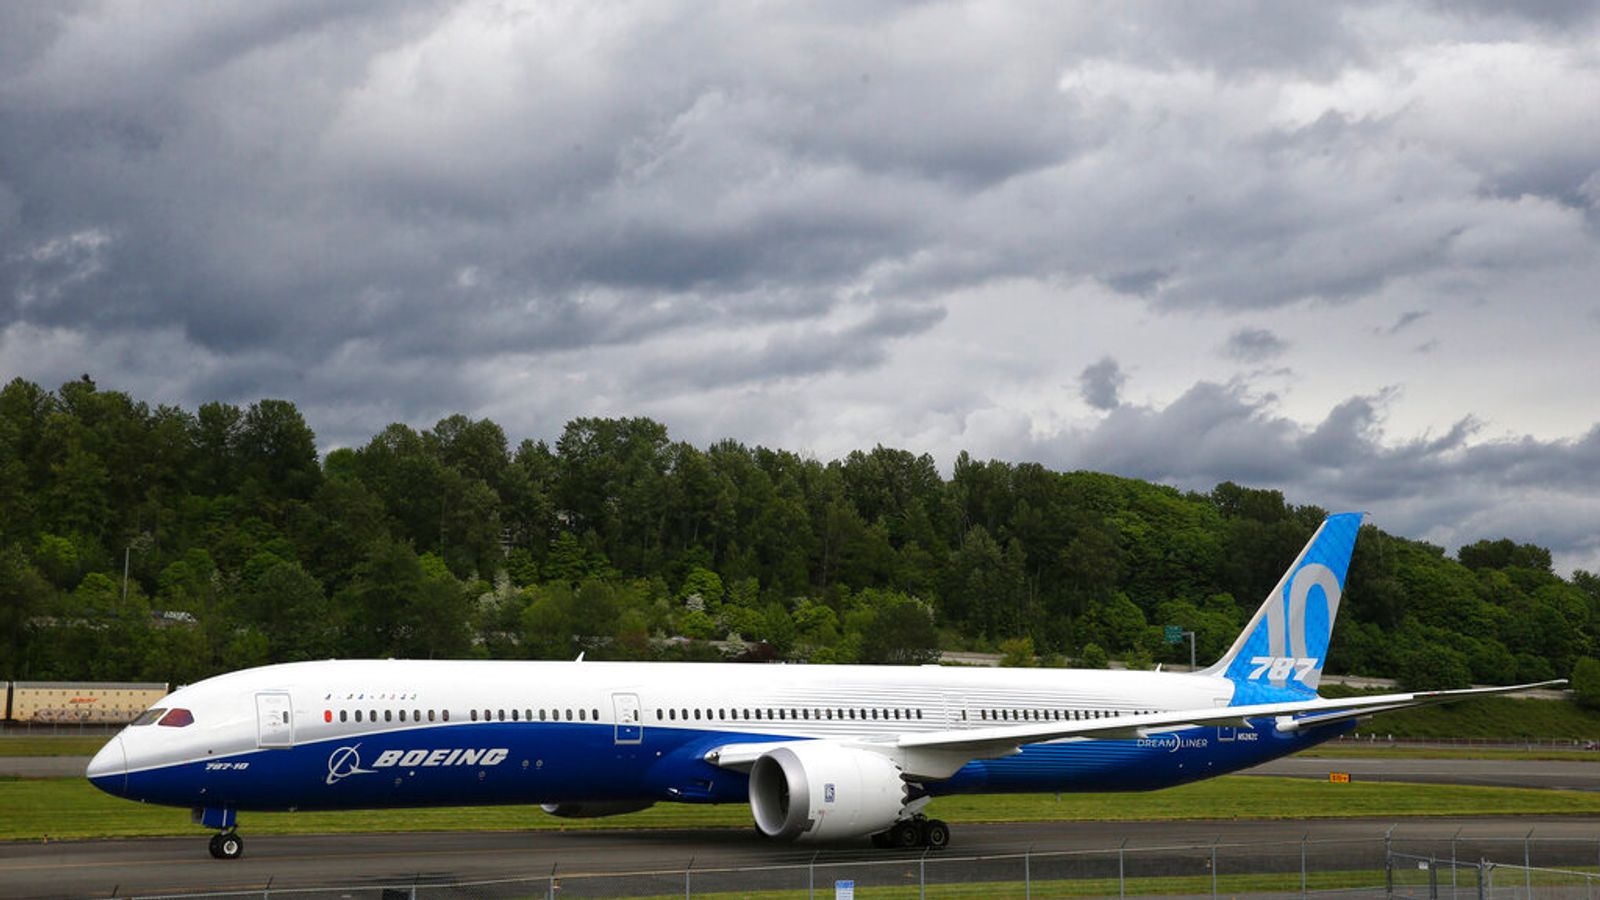 Boeing in Hot Water: Insider Exposes Dangerous Secrets Behind Airplane Failures